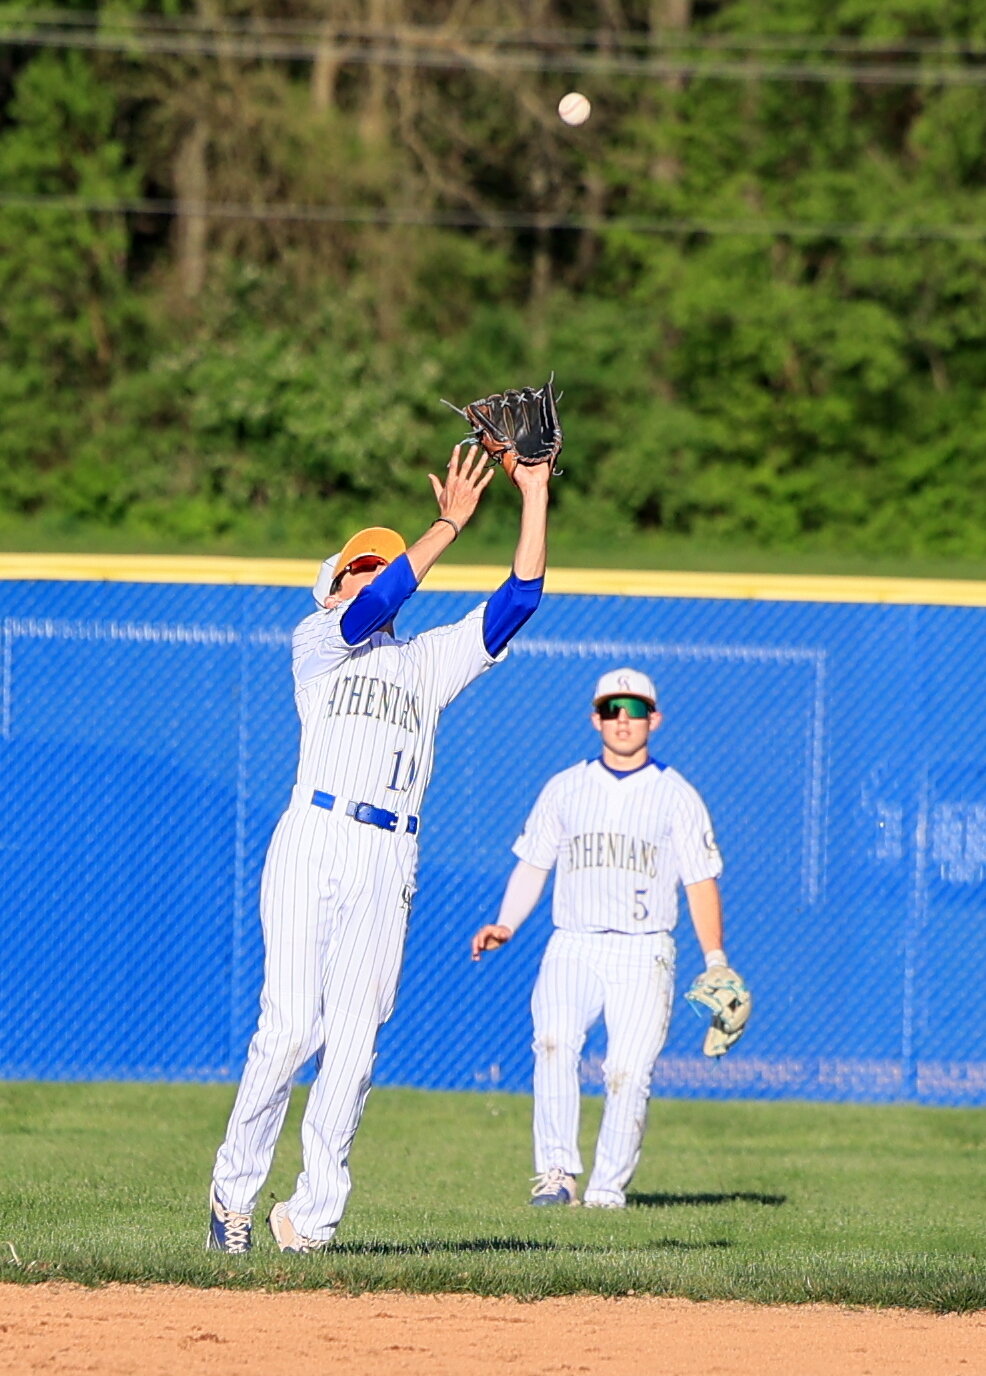 Freshman second baseman Henry Bannon makes a catch in shallow right field.